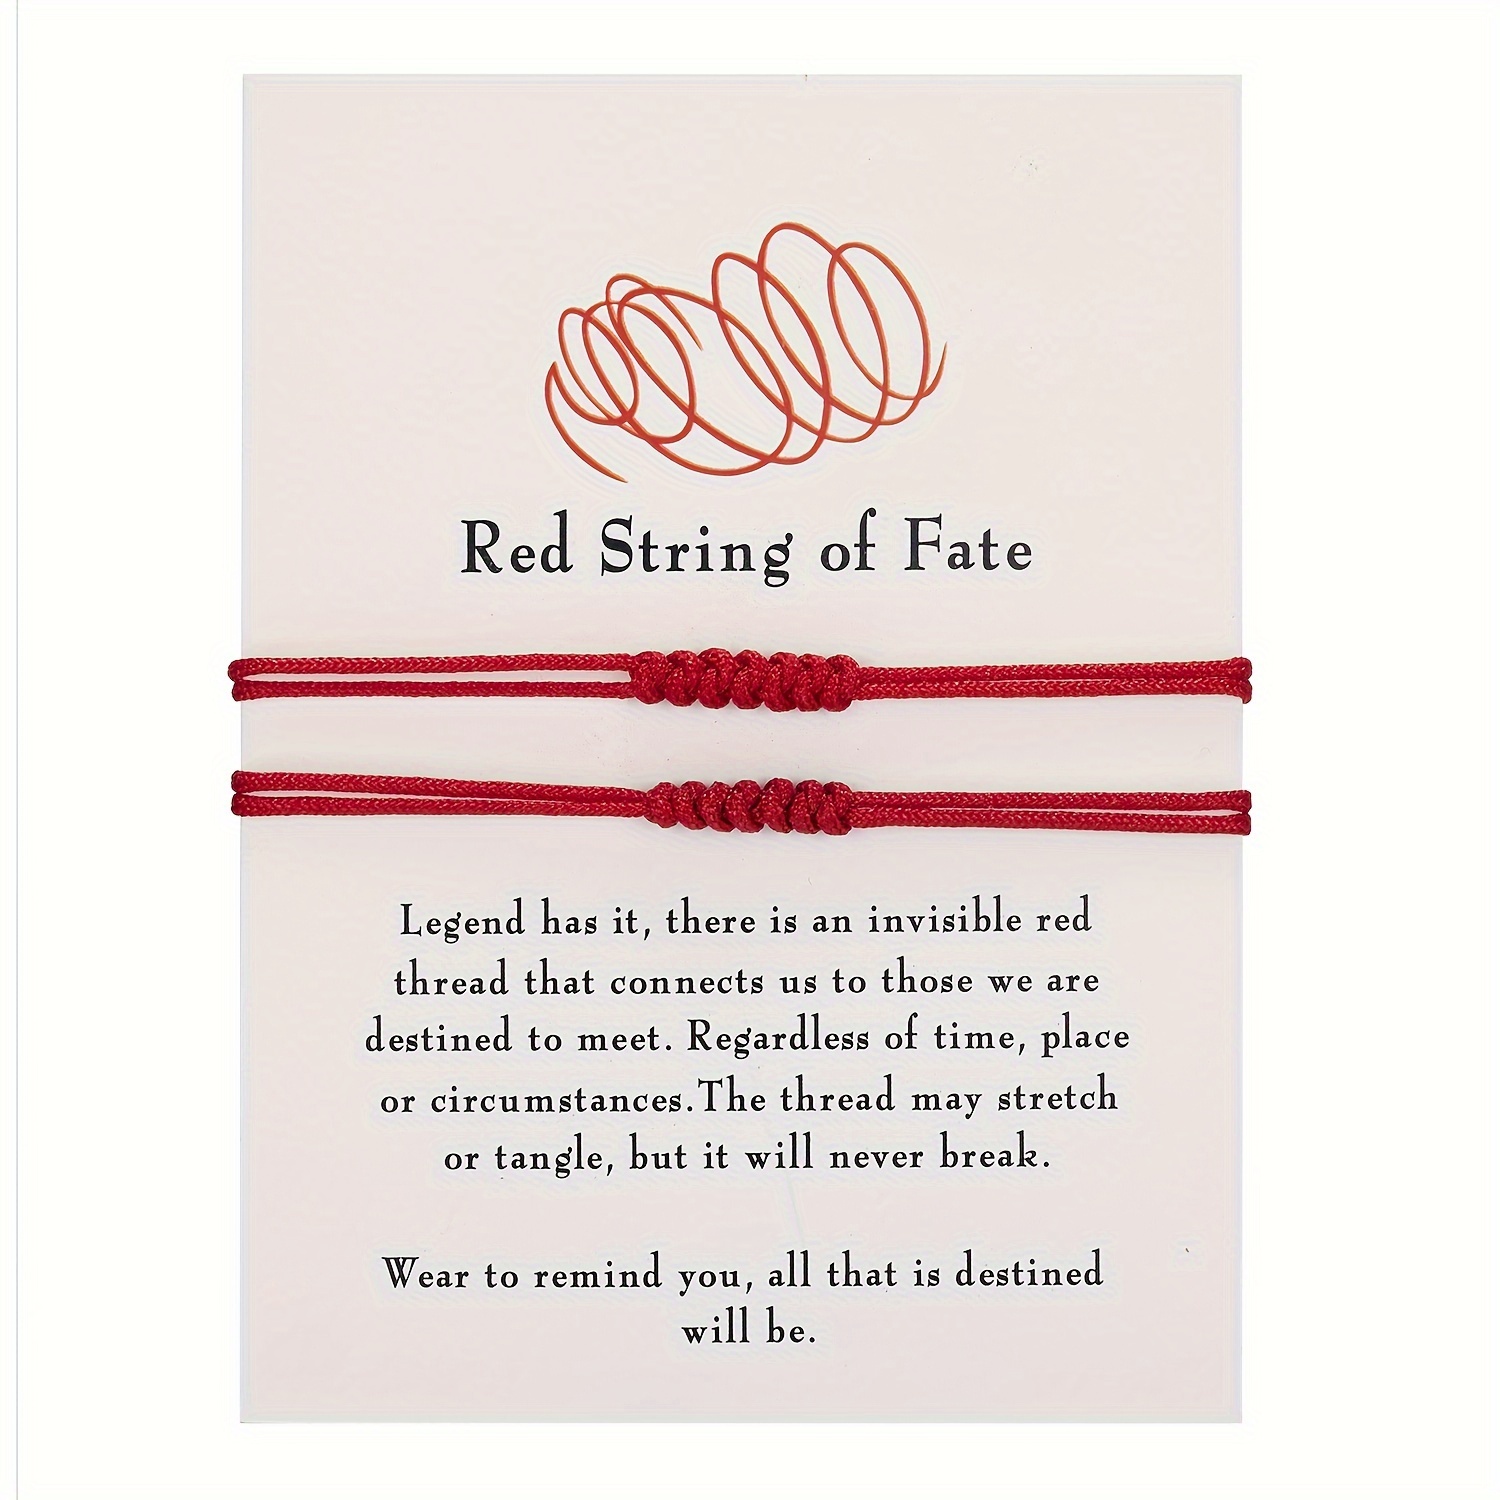 

2pcs, Red String Of Fate Bracelets, Adjustable Knotted Cord, Friendship Couples Lucky Charm, Vintage & Minimalist Style With Inspirational Card